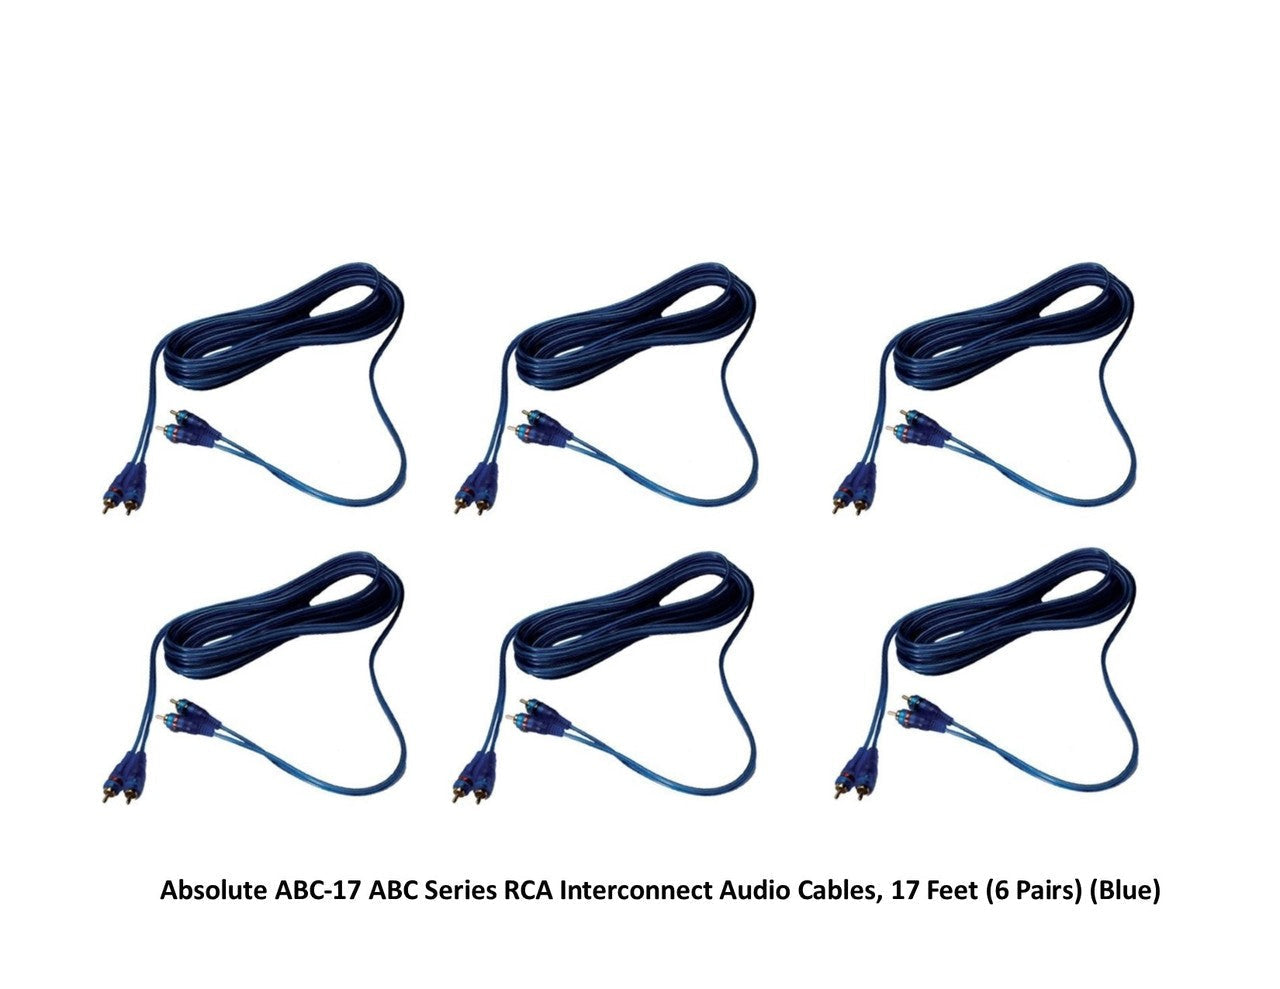 Absolute ABC-17 ABC Series RCA Interconnect Audio Cables 17 Feet 6 Pair (Blue)